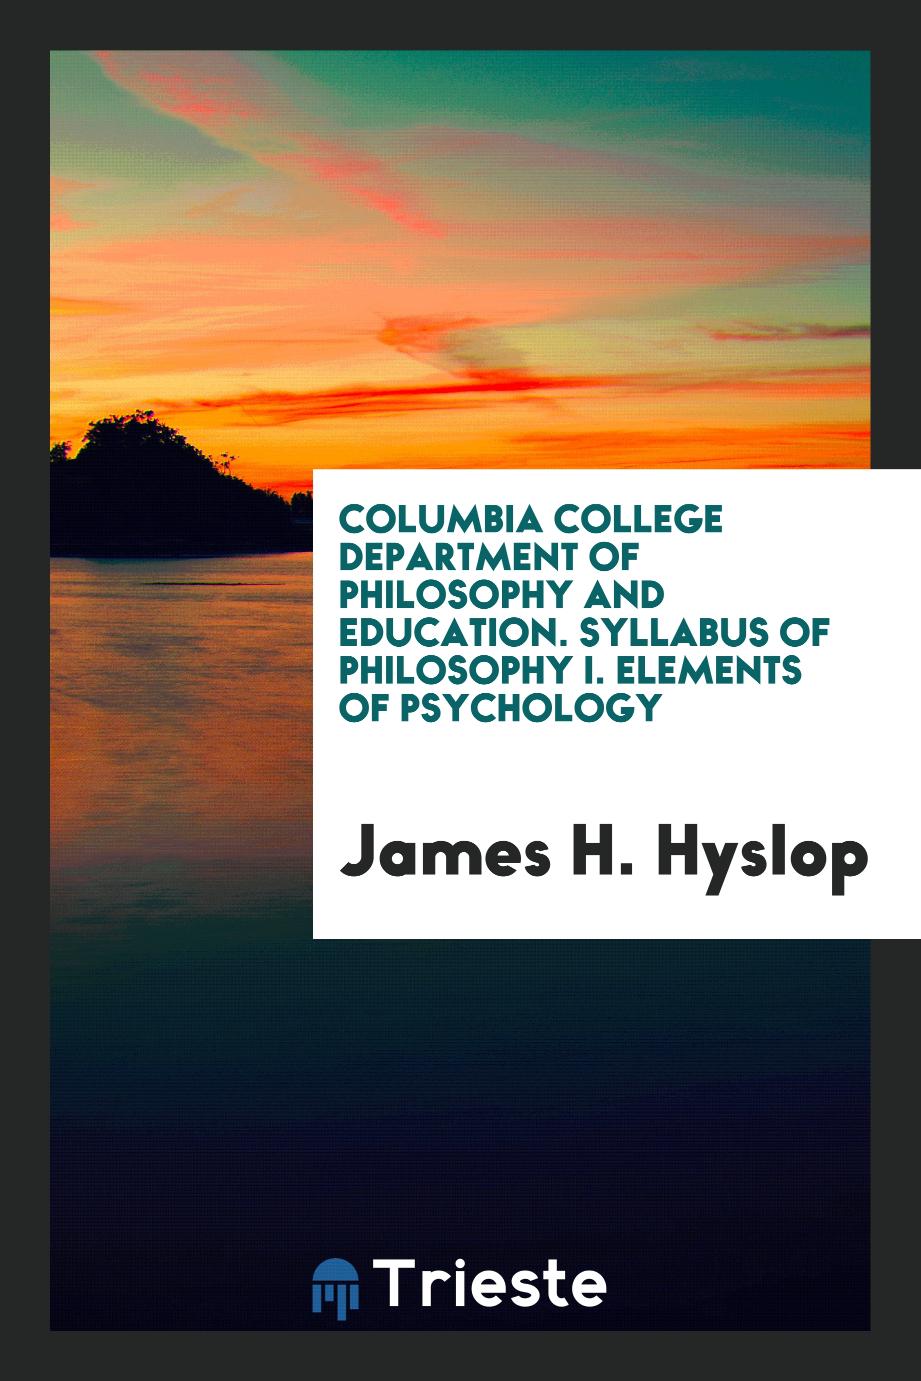 Columbia College Department of Philosophy and Education. Syllabus of Philosophy I. Elements of Psychology